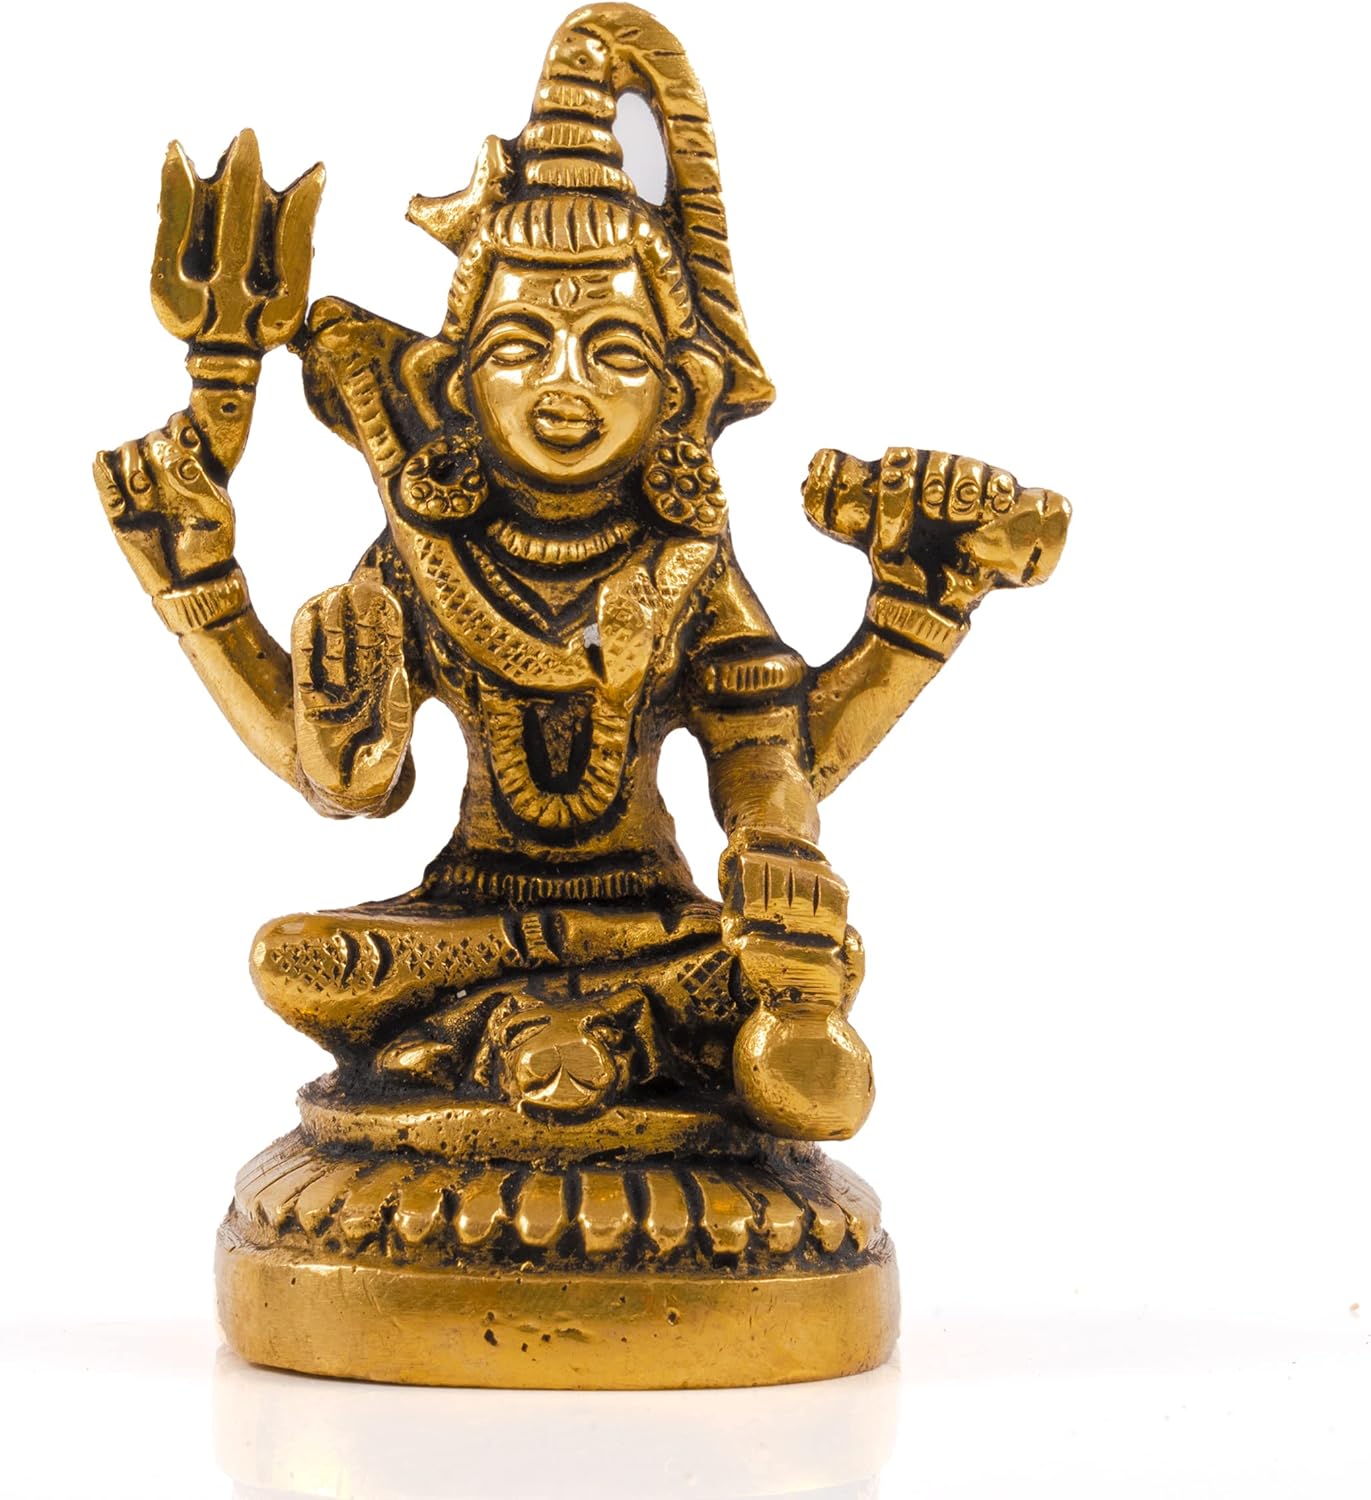 Tarini Gallery Brass Pooja Murti Idol Statue God Lord Spiritual Religious Sculpture Indian Antique Statue Décor Showpiece for Home Entrance Temple Puja Decoration Festivals Diwali and Gifting (Shiva)